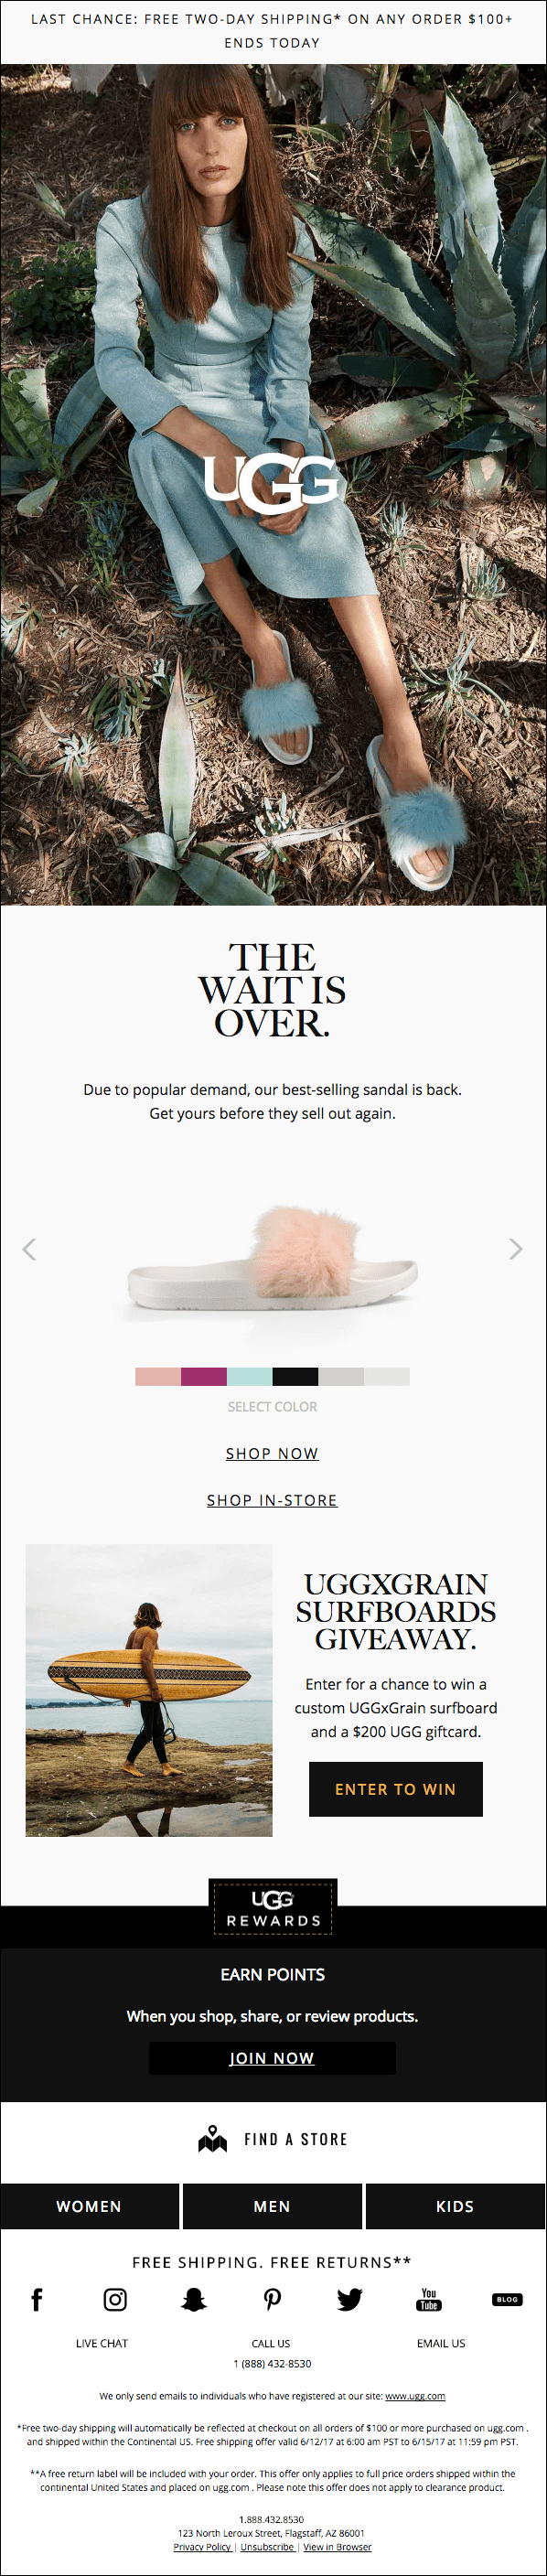 UGG Back-in-stock email